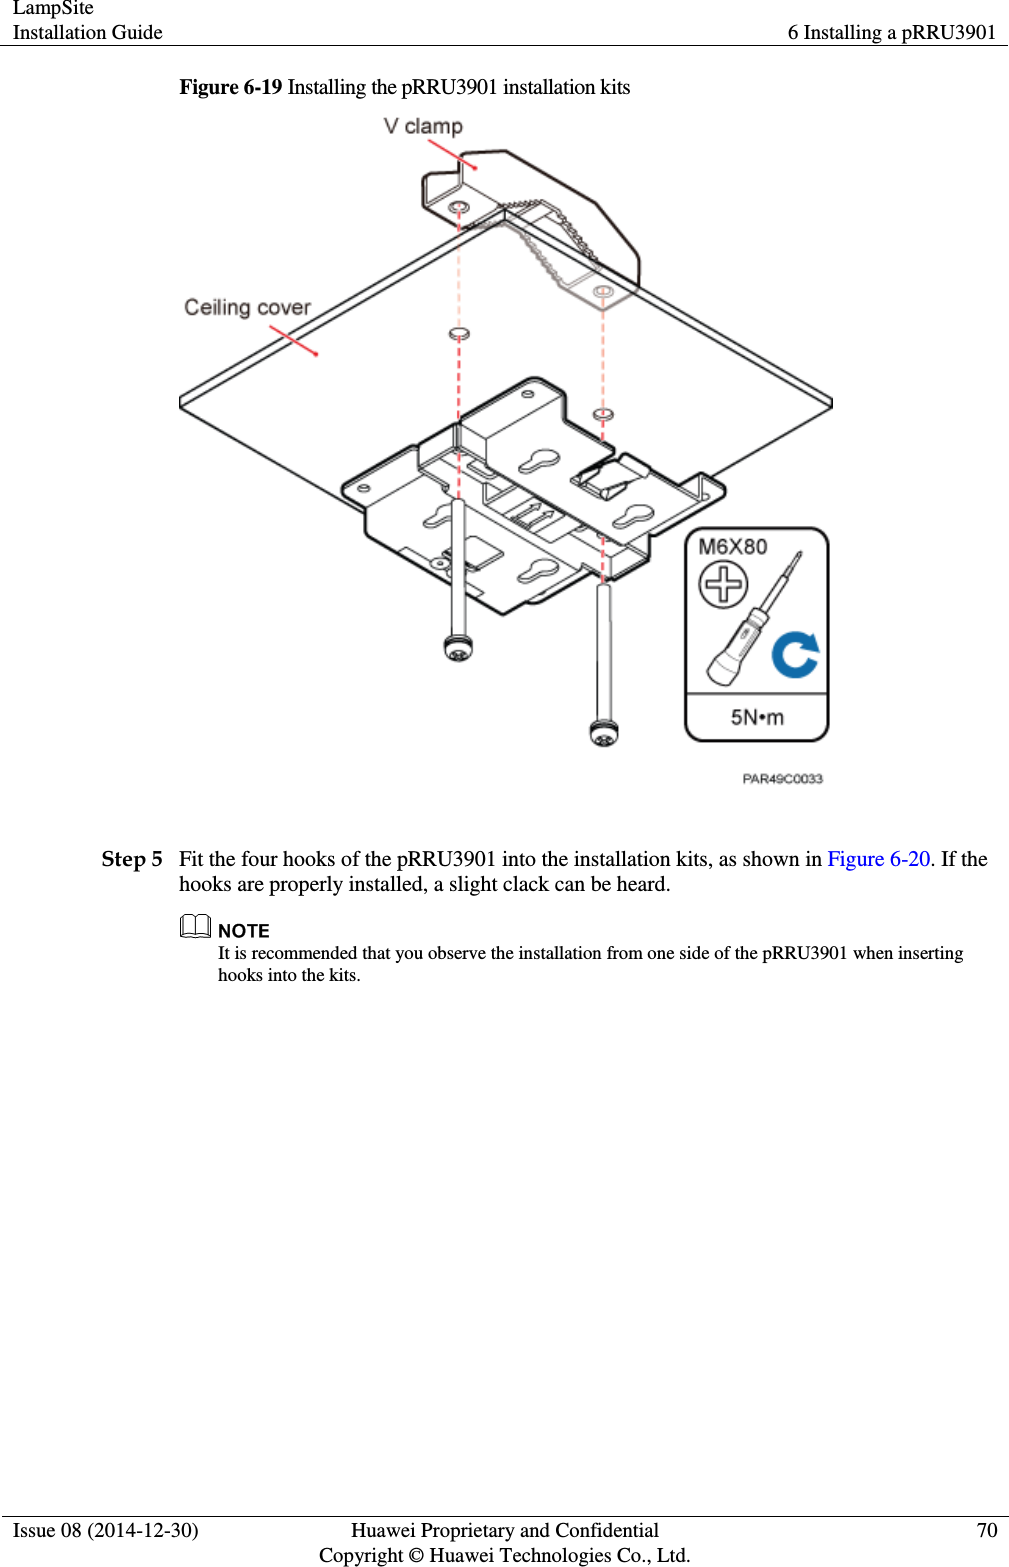 LampSite Installation Guide 6 Installing a pRRU3901  Issue 08 (2014-12-30) Huawei Proprietary and Confidential                                     Copyright © Huawei Technologies Co., Ltd. 70  Figure 6-19 Installing the pRRU3901 installation kits   Step 5 Fit the four hooks of the pRRU3901 into the installation kits, as shown in Figure 6-20. If the hooks are properly installed, a slight clack can be heard.  It is recommended that you observe the installation from one side of the pRRU3901 when inserting hooks into the kits. 